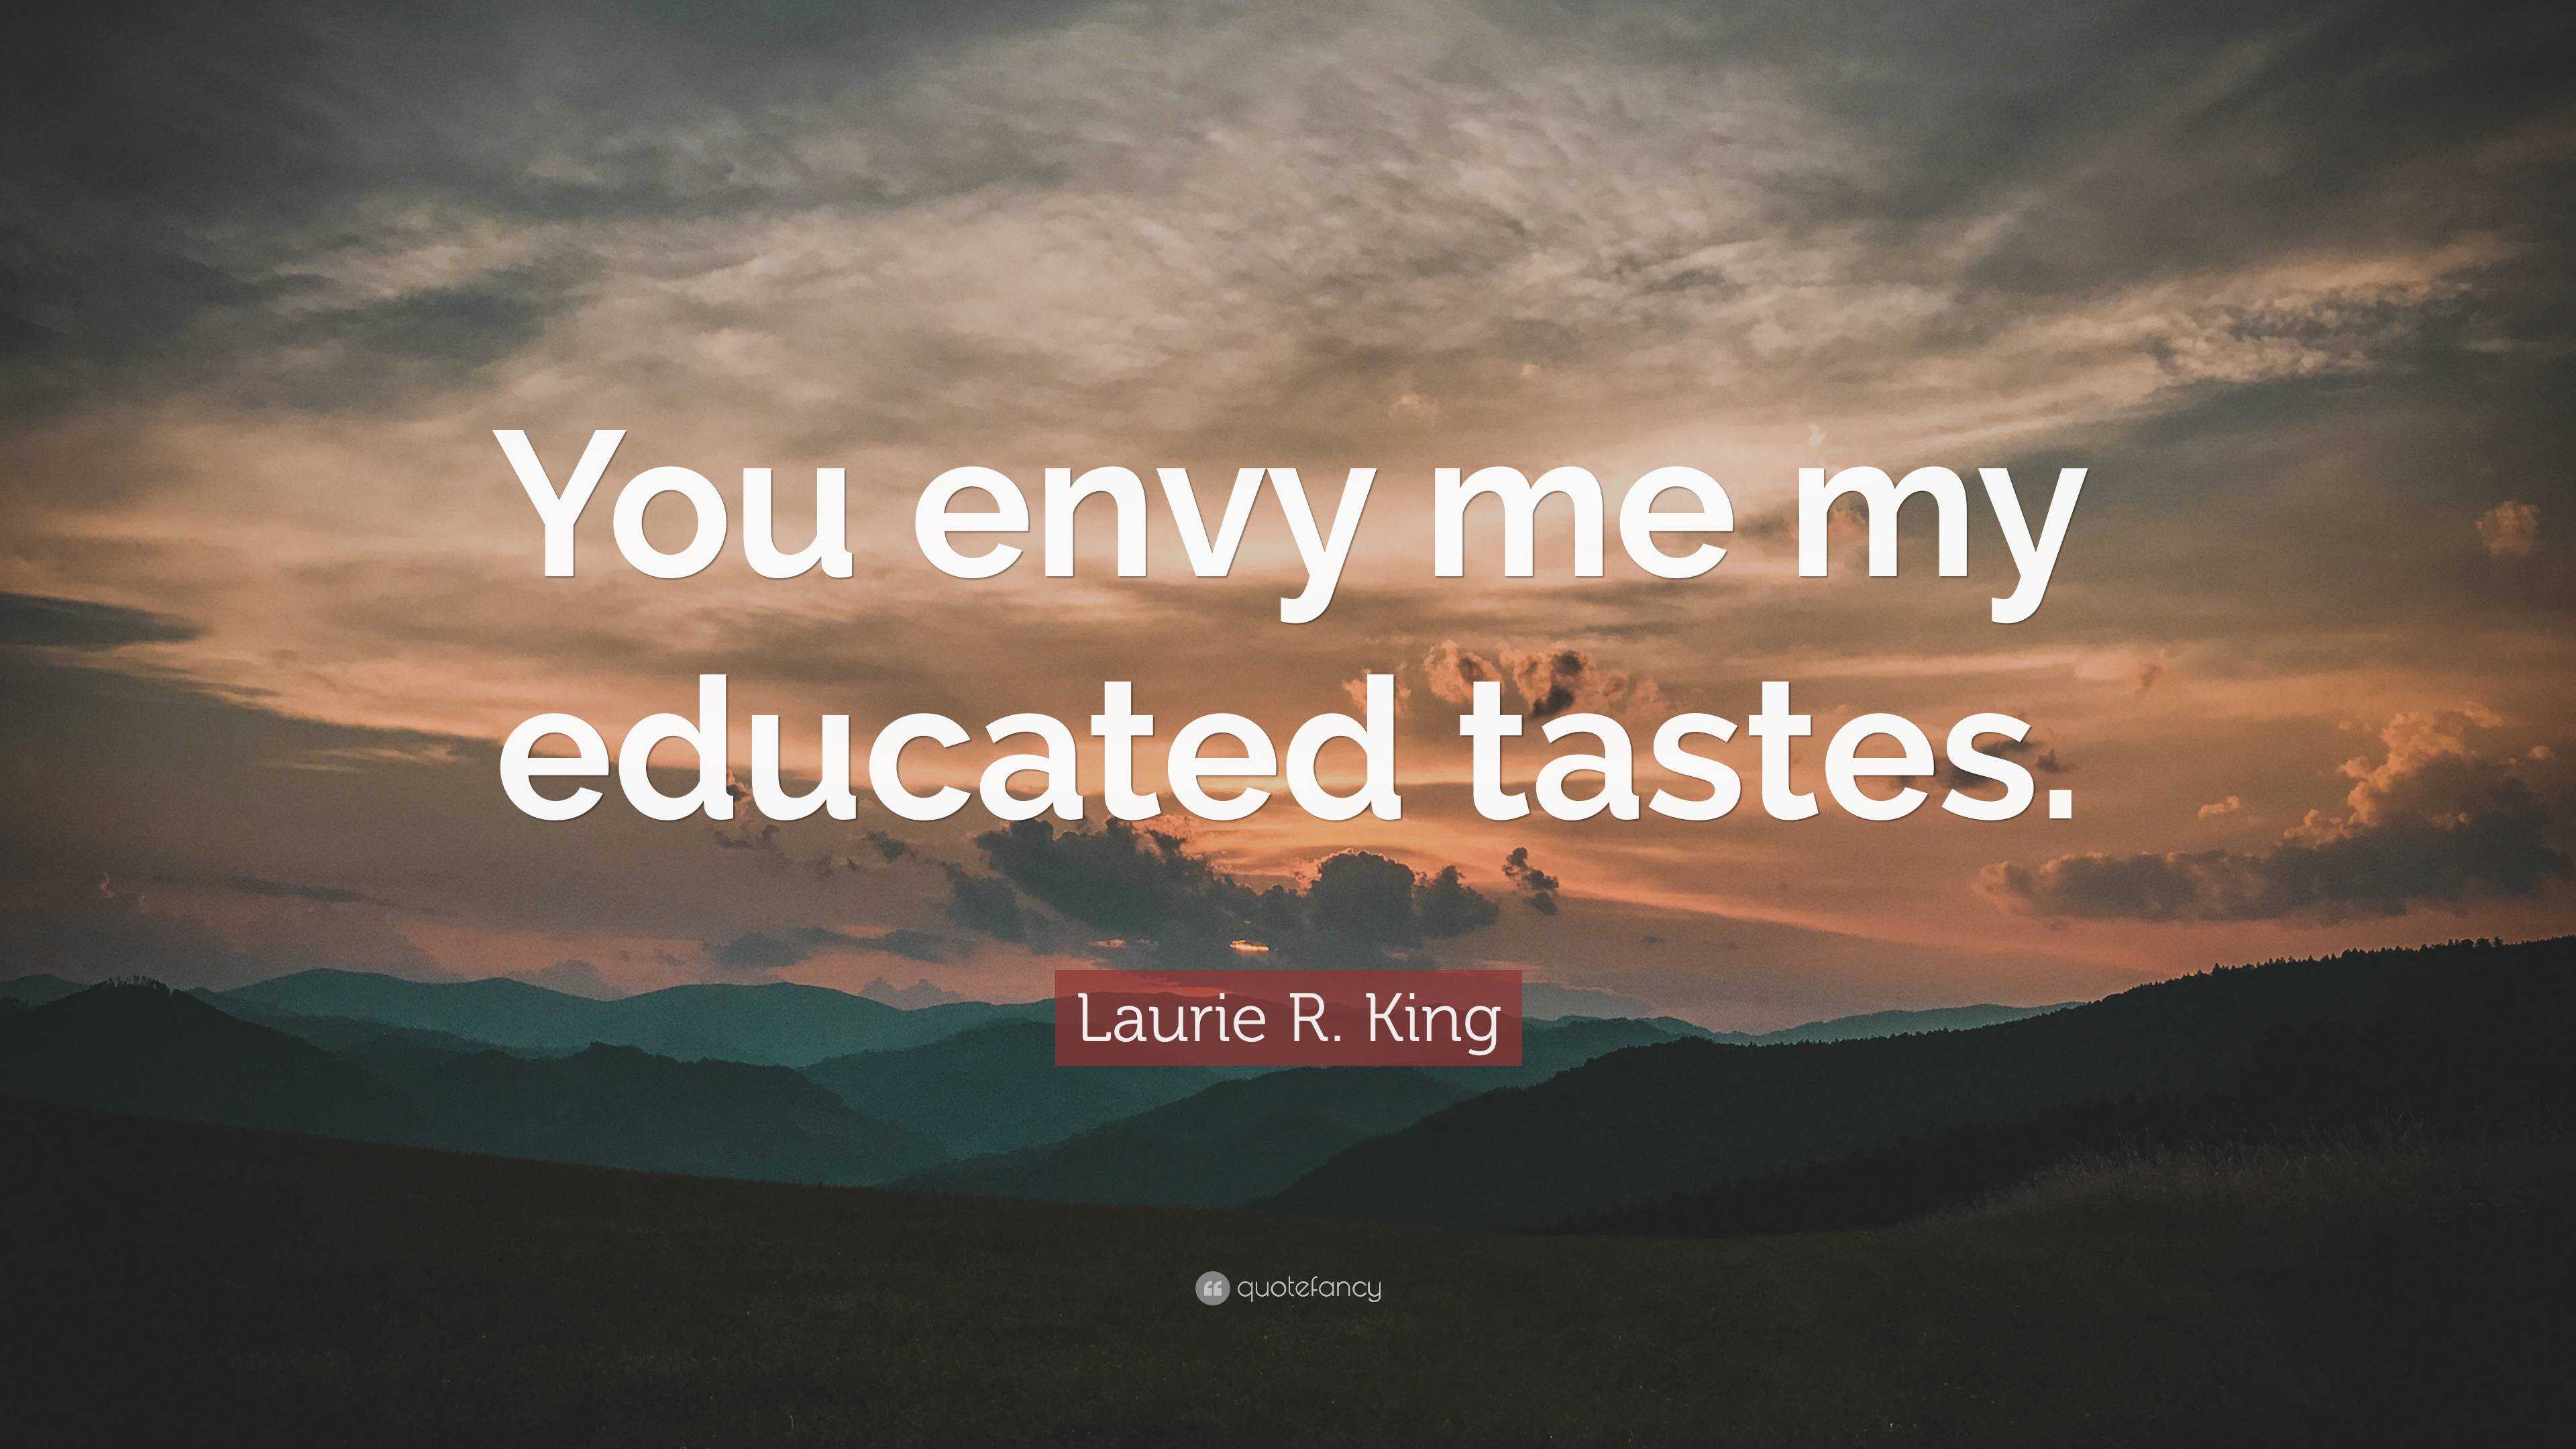 Laurie R. King Quote: “You envy me my educated tastes.”